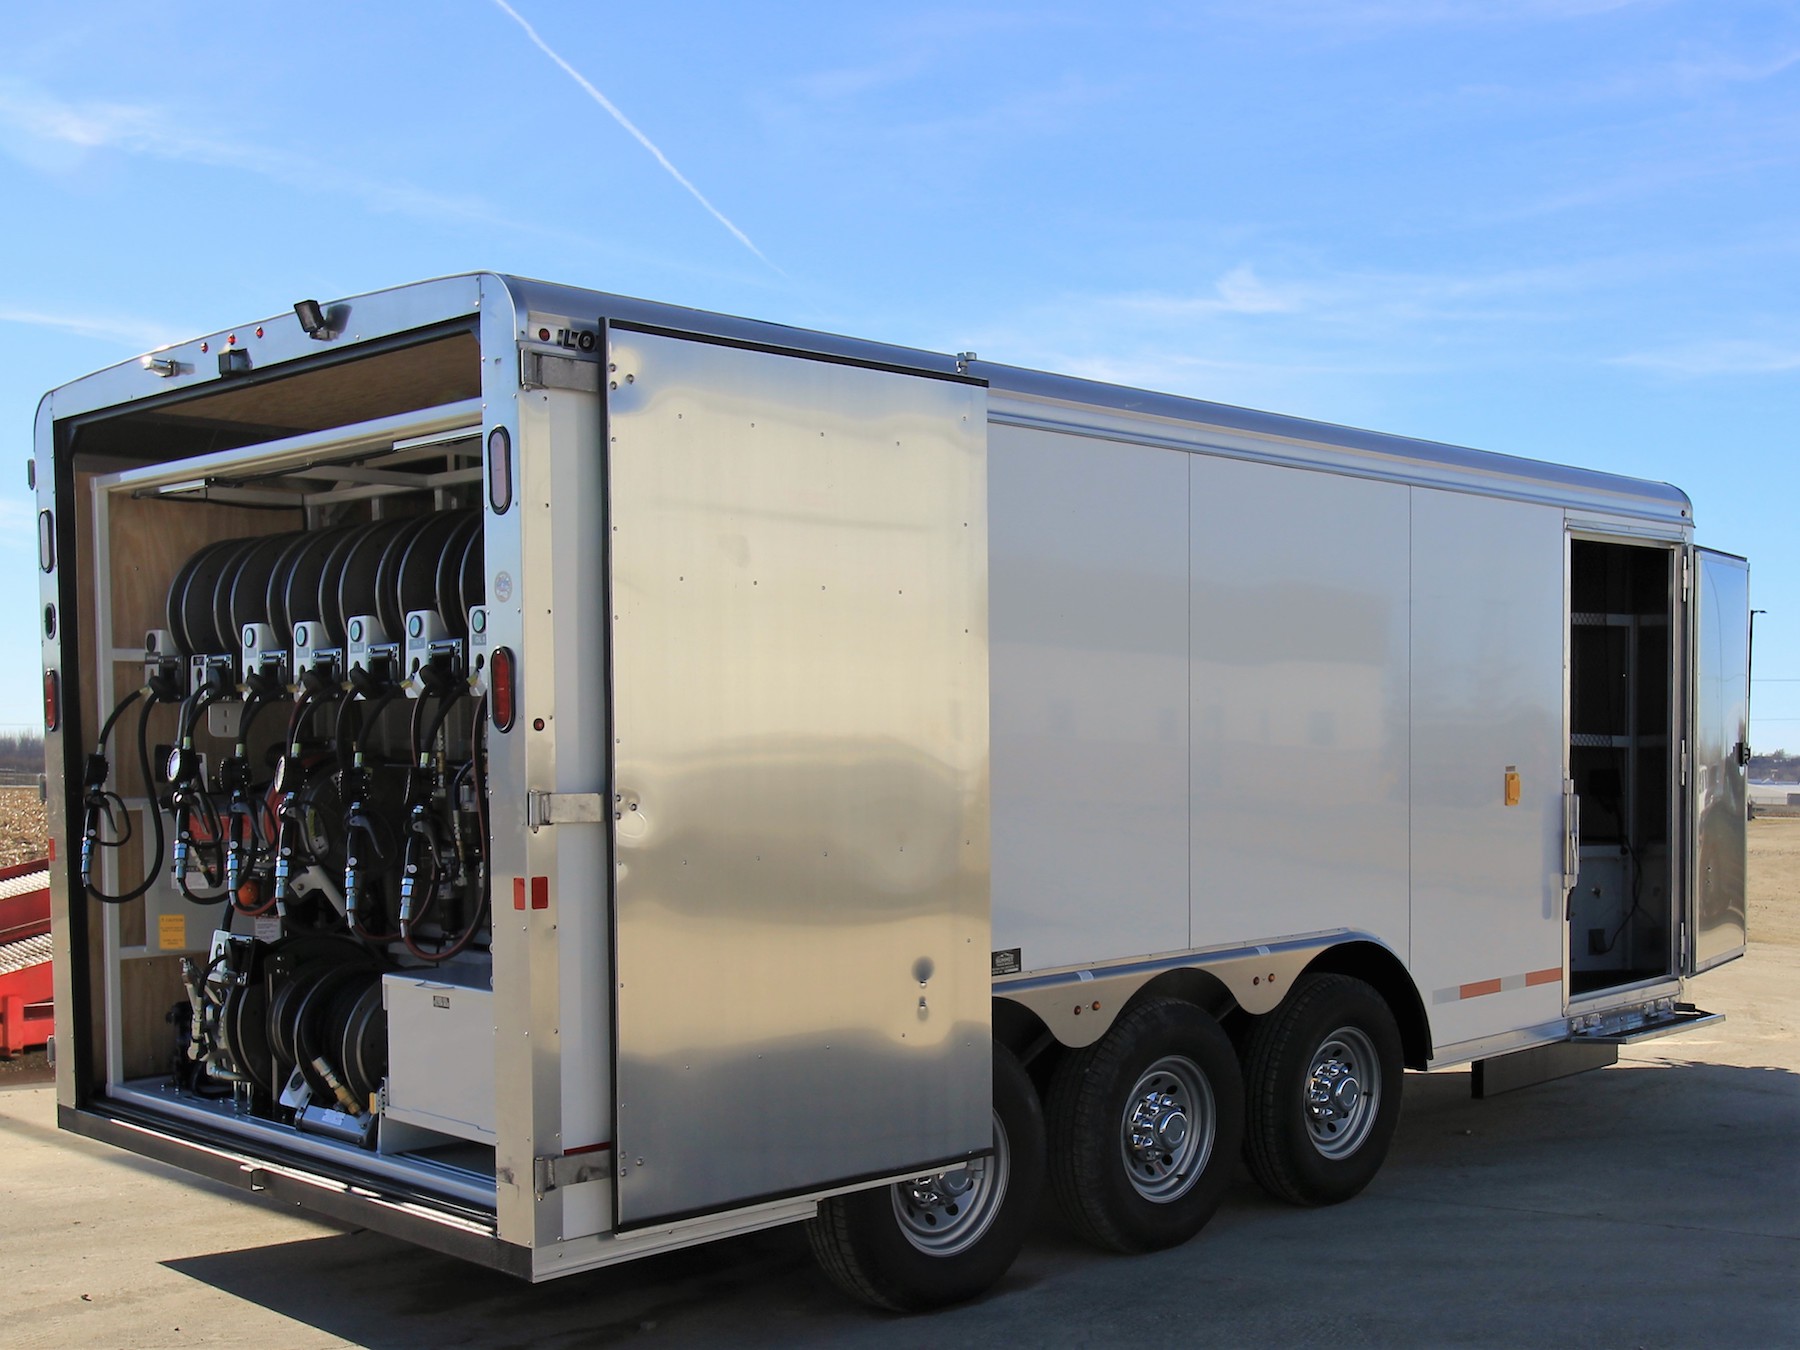 Lube Equipment Option: Summit lube trailer are a popular choisce for mobile lube equipment